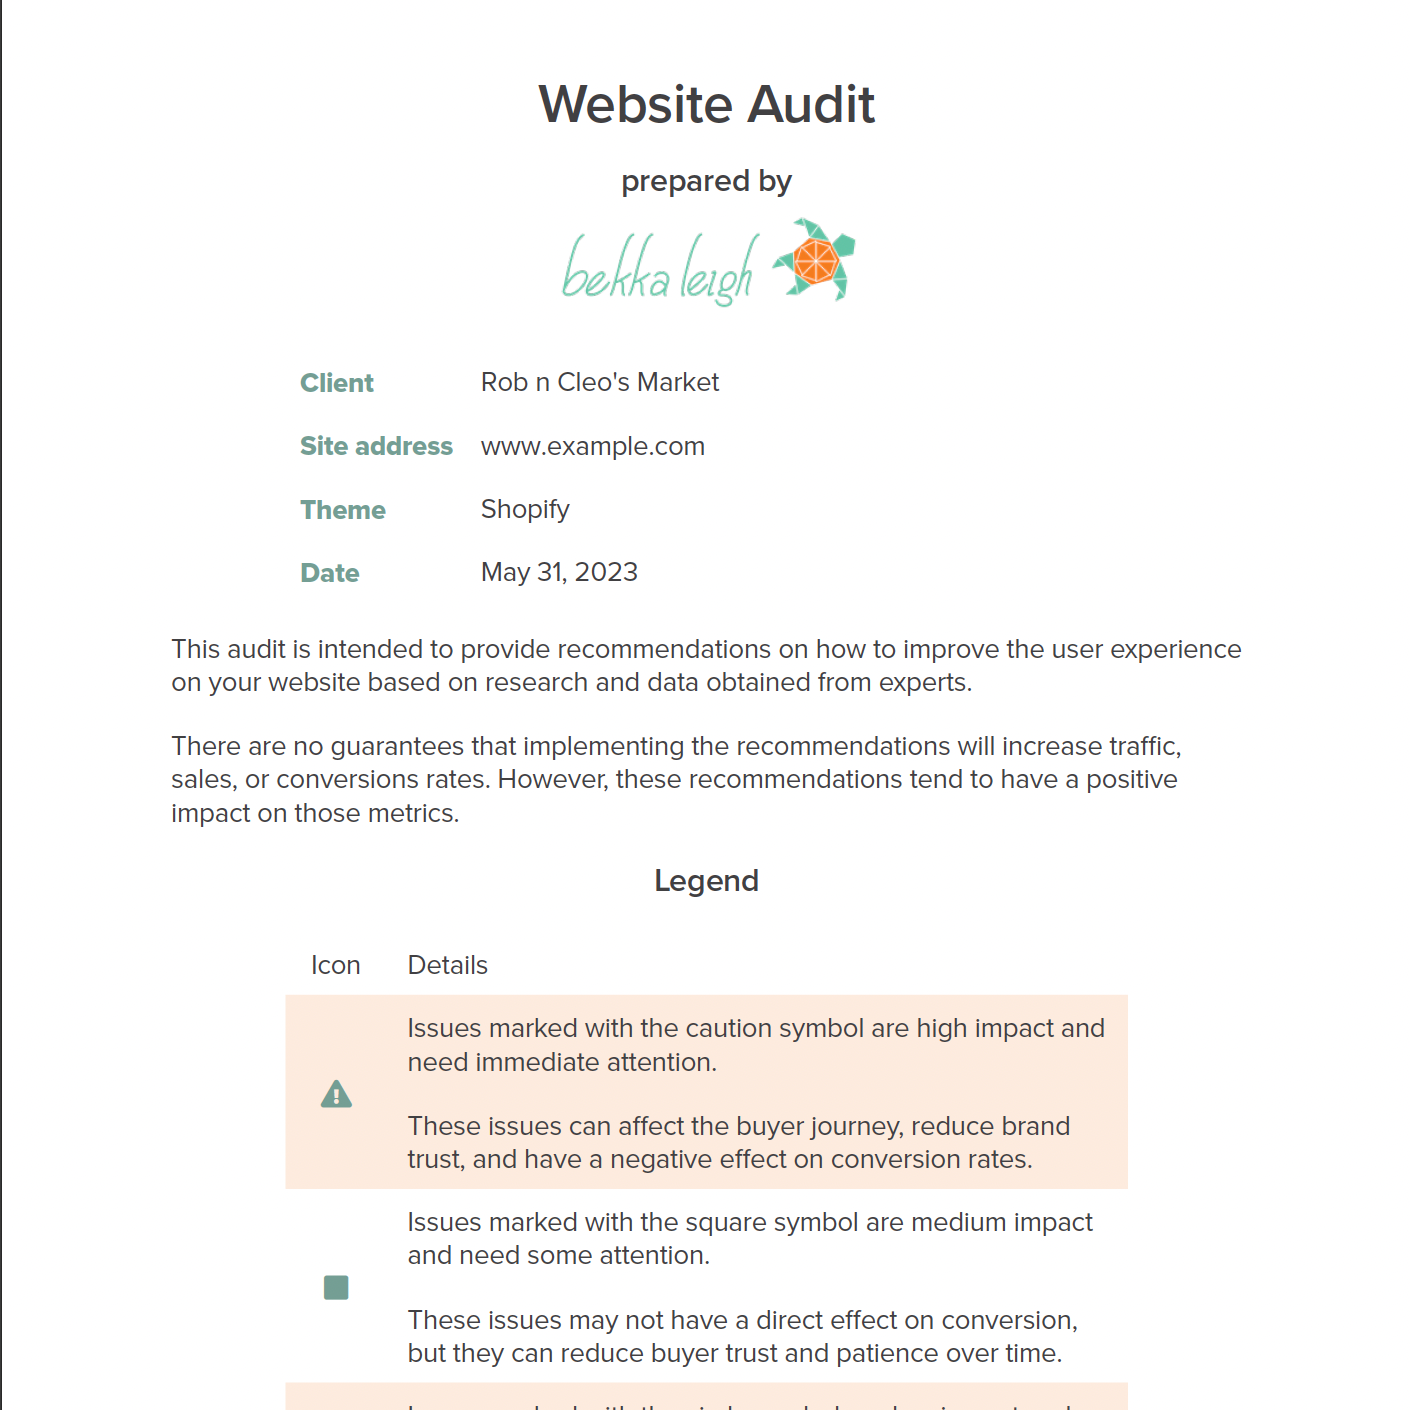 Partial view of the first page of a website audit document containing branding for bekka leigh design and details about the purpose of the audit.